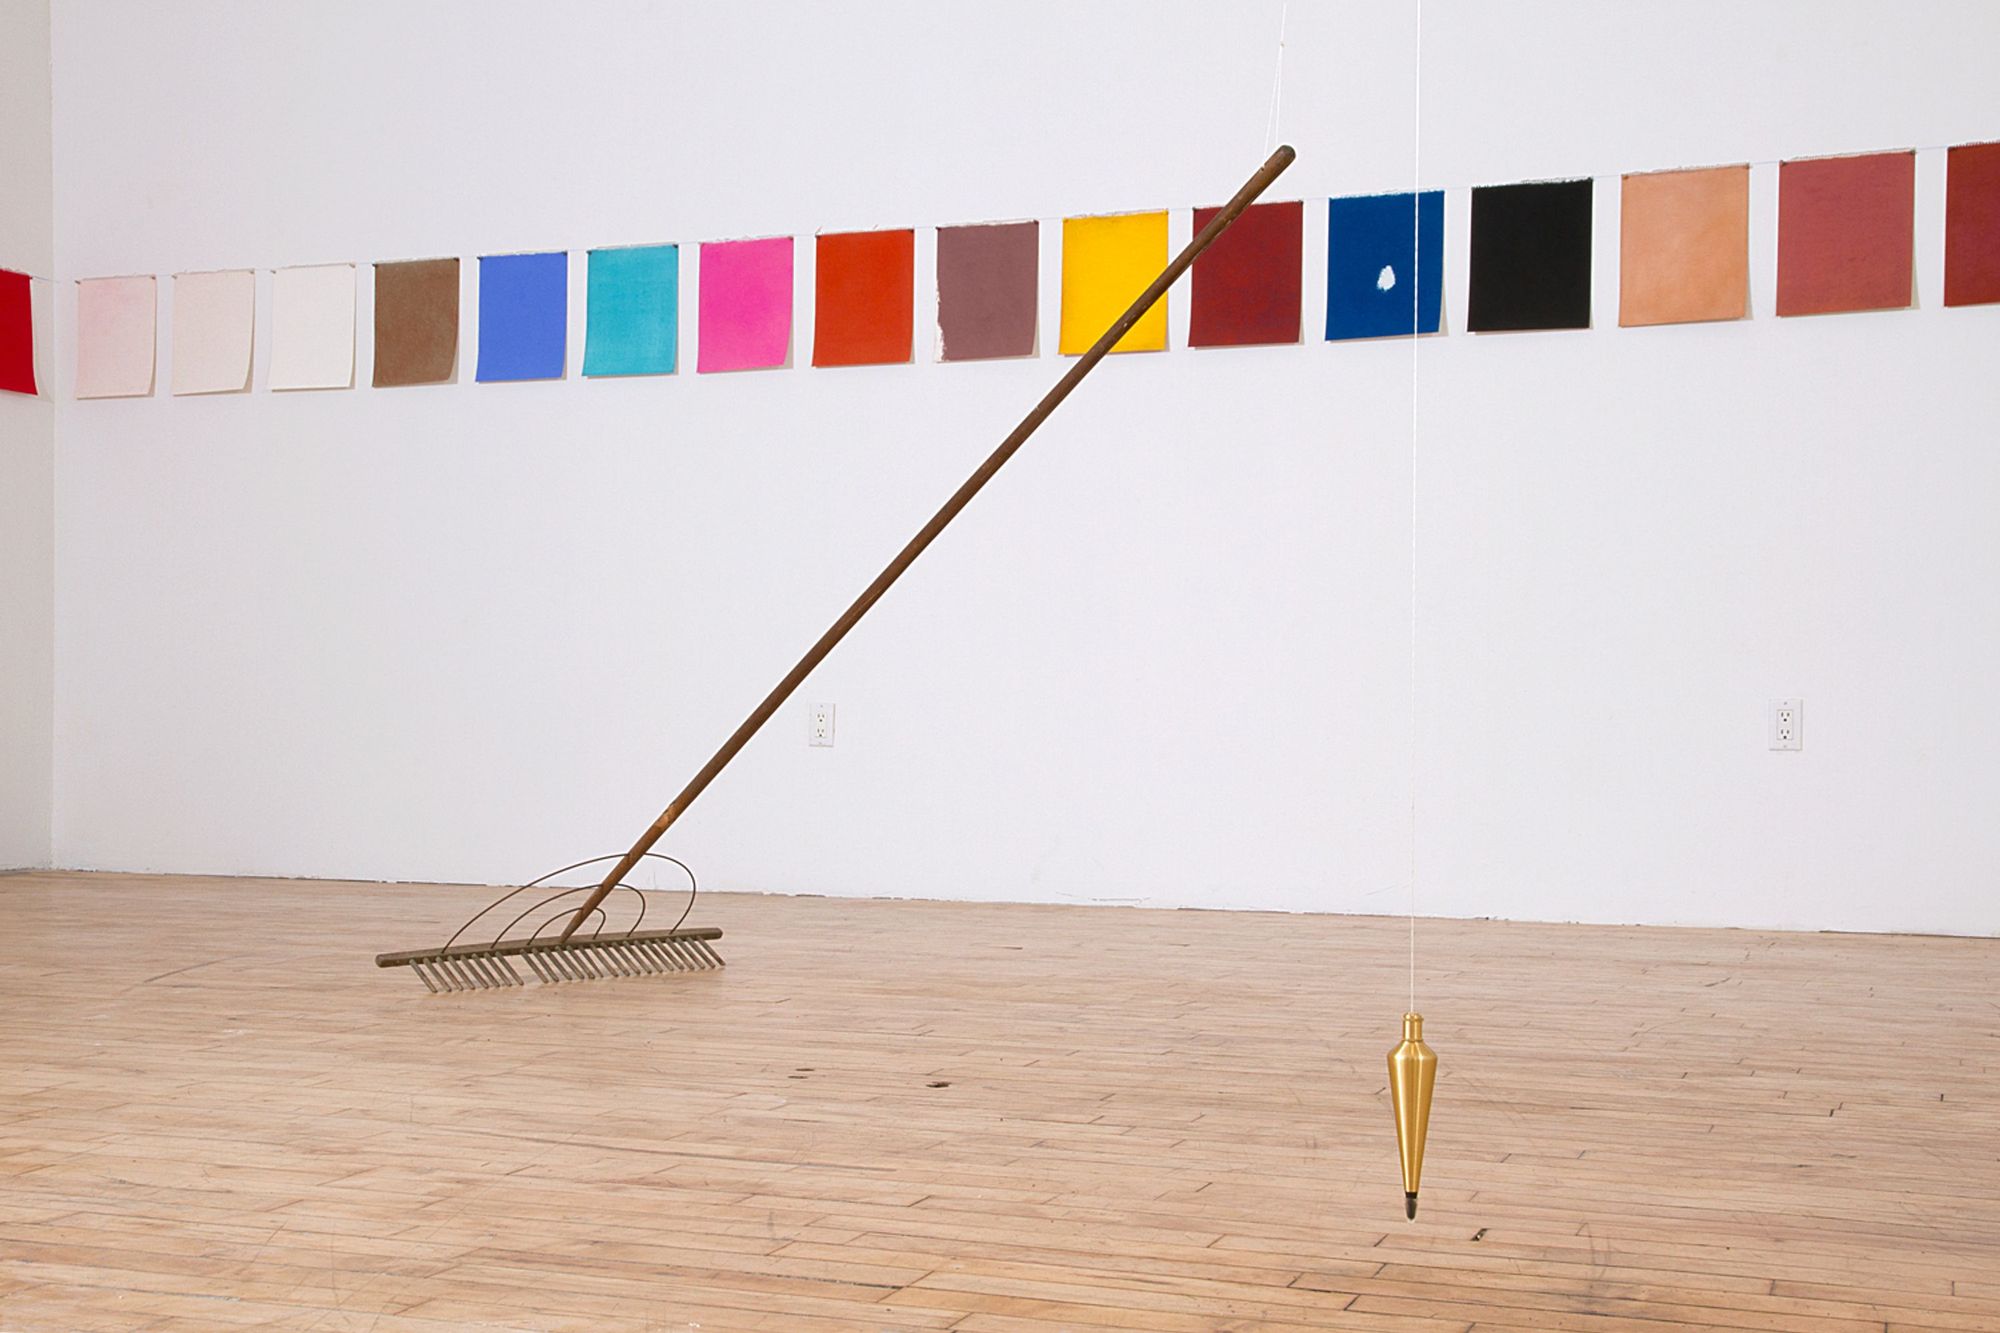 An installation view of Kathleen White's "A Rake's Progress," which features a long row of colorful, paper sheets, and a hanging plumb and rake in the middle of the floor